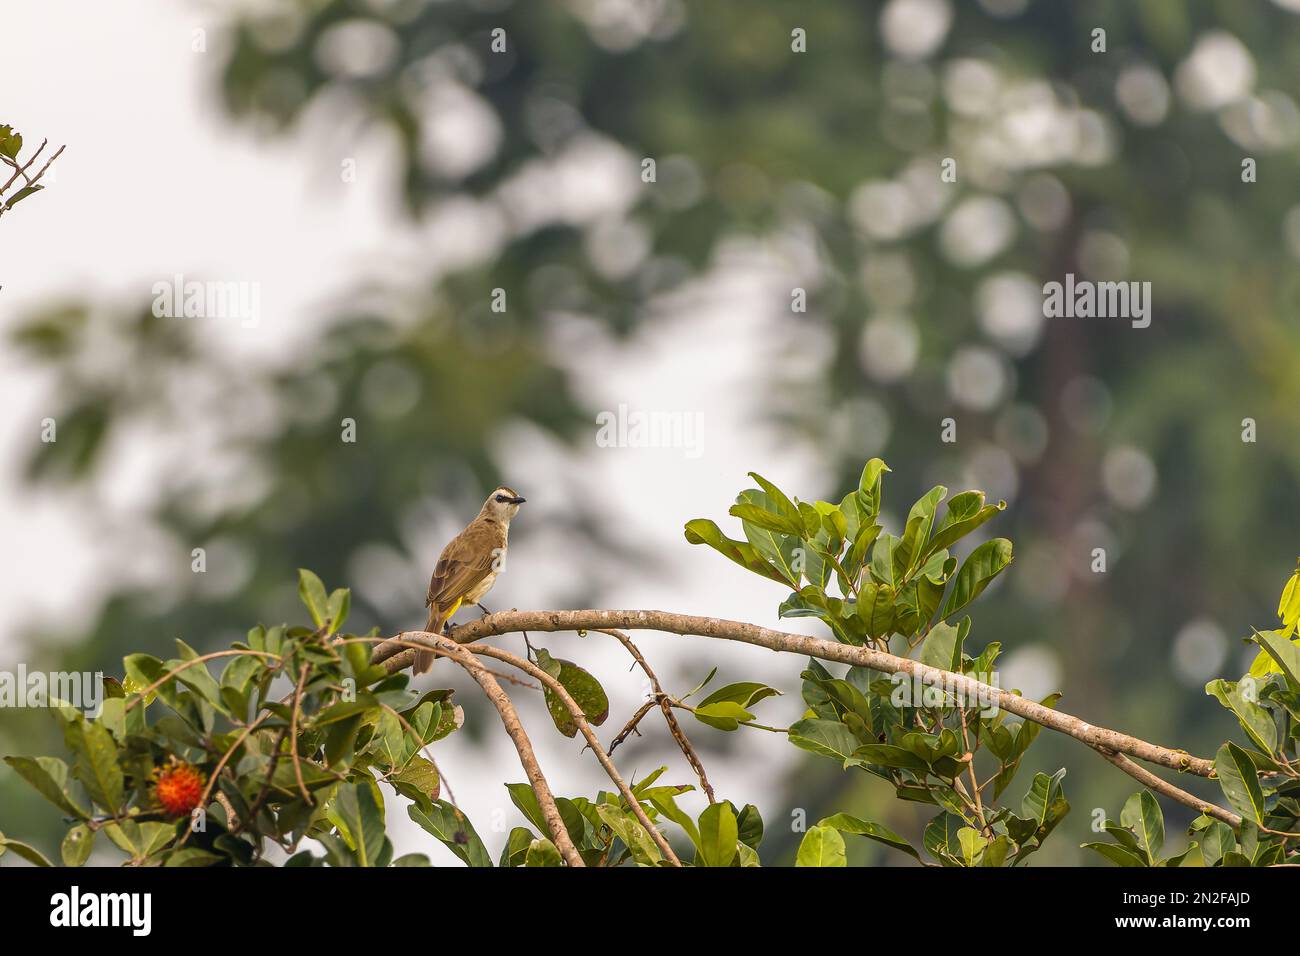 A yellow-vented bulbul bird (Pycnonotus goiavier) or eastern yellow-vented bulbul perched on a rambutan tree branch, blurred green leaves background Stock Photo